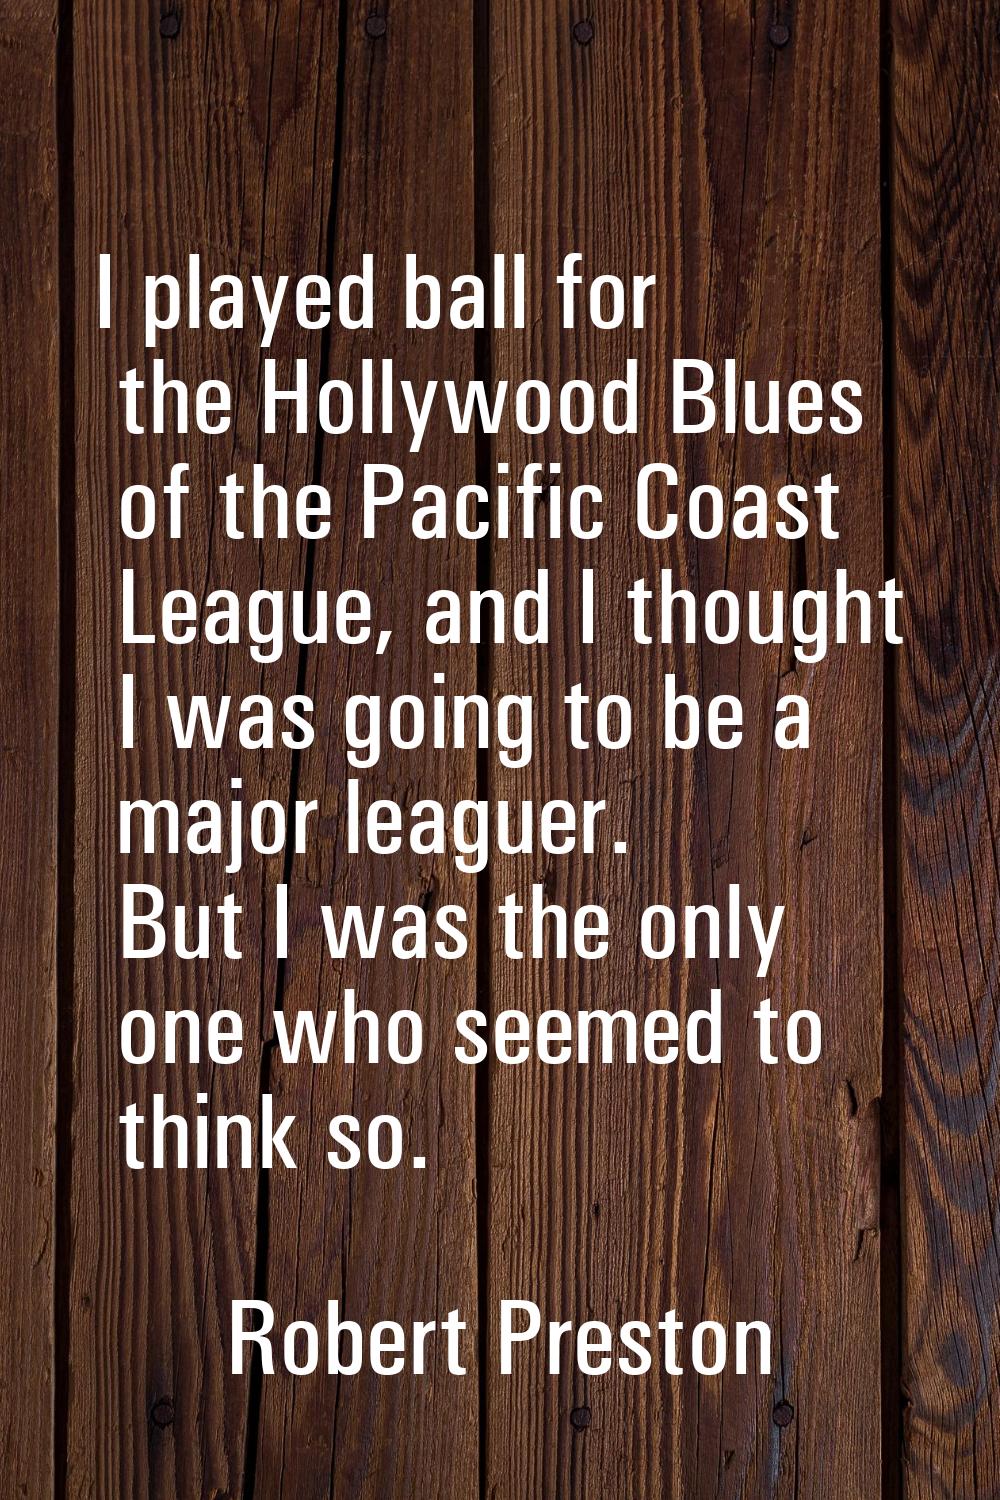 I played ball for the Hollywood Blues of the Pacific Coast League, and I thought I was going to be 